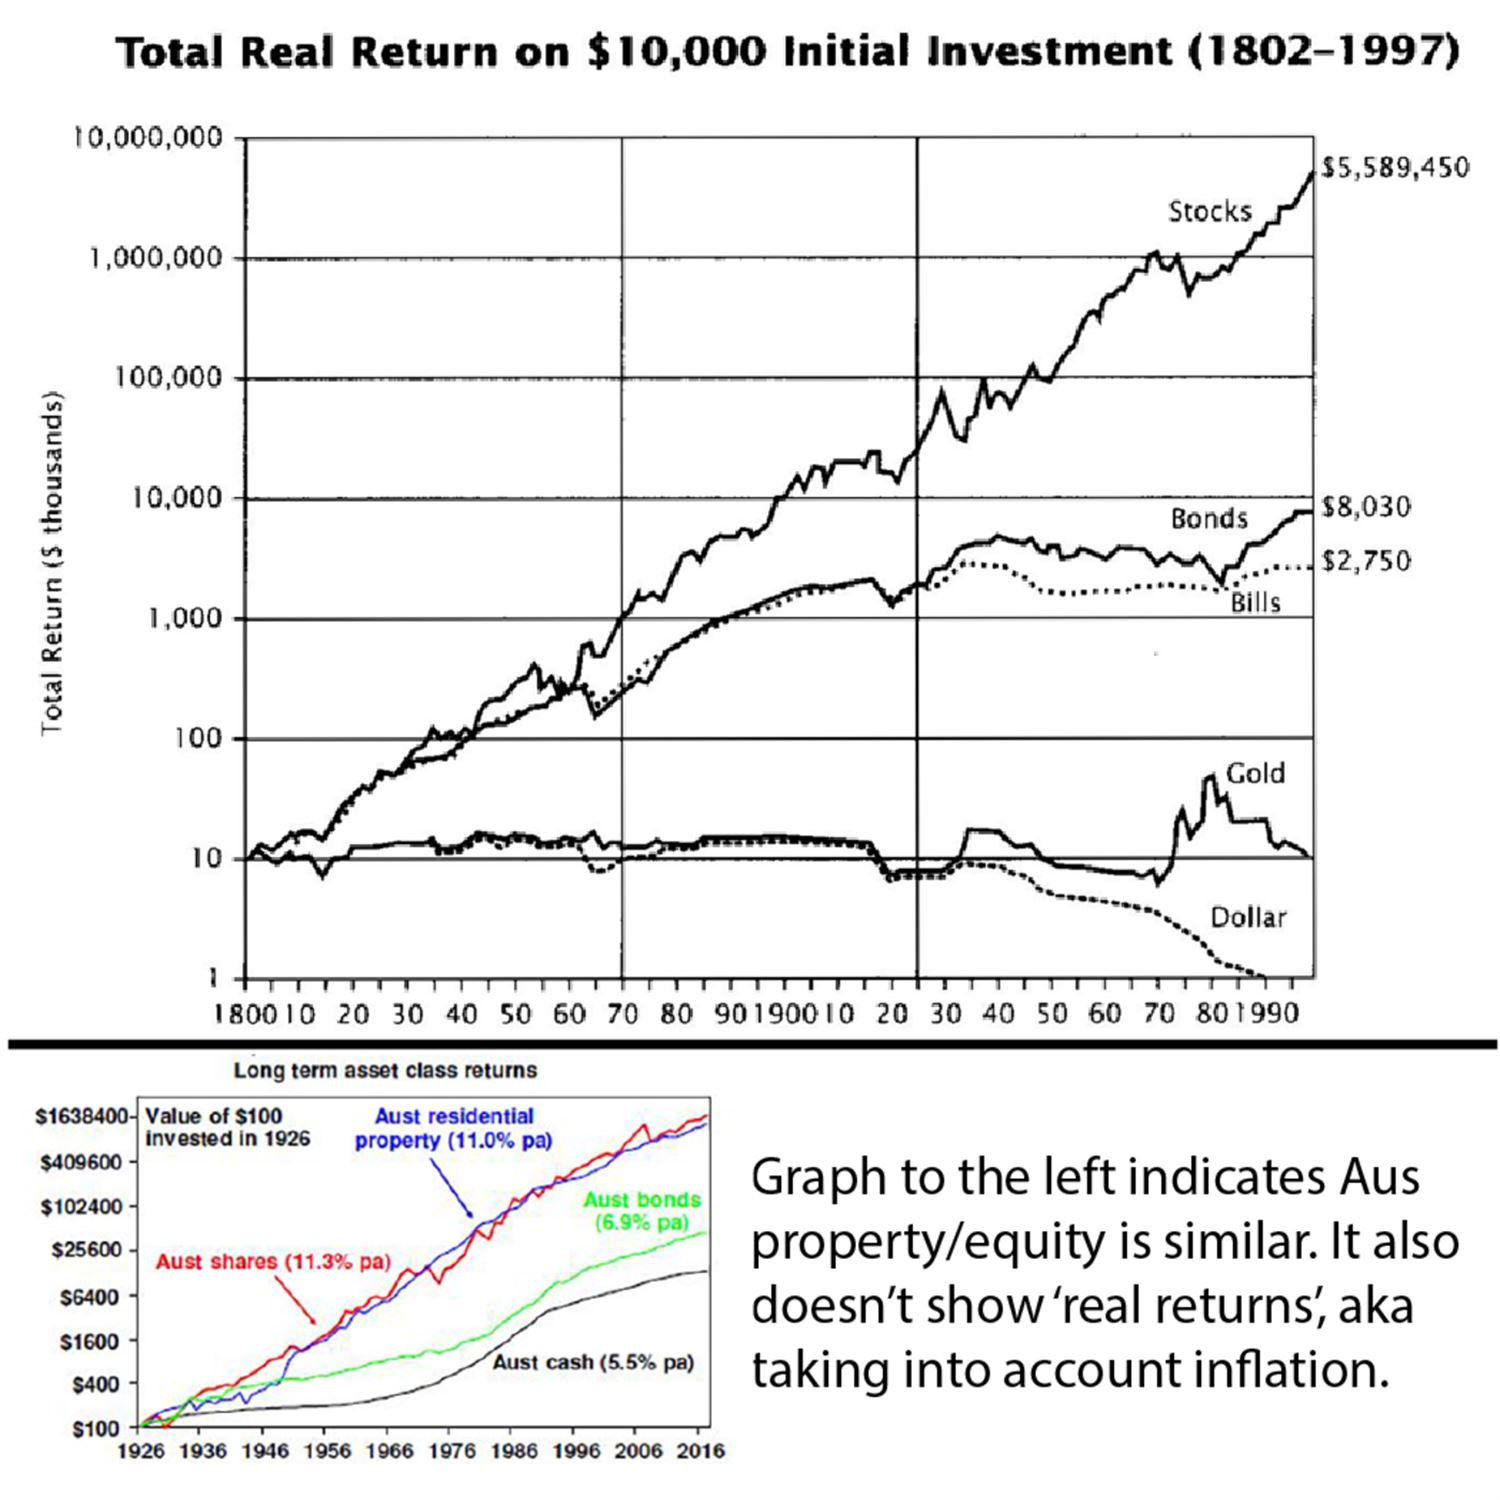 Long term real returns from investments